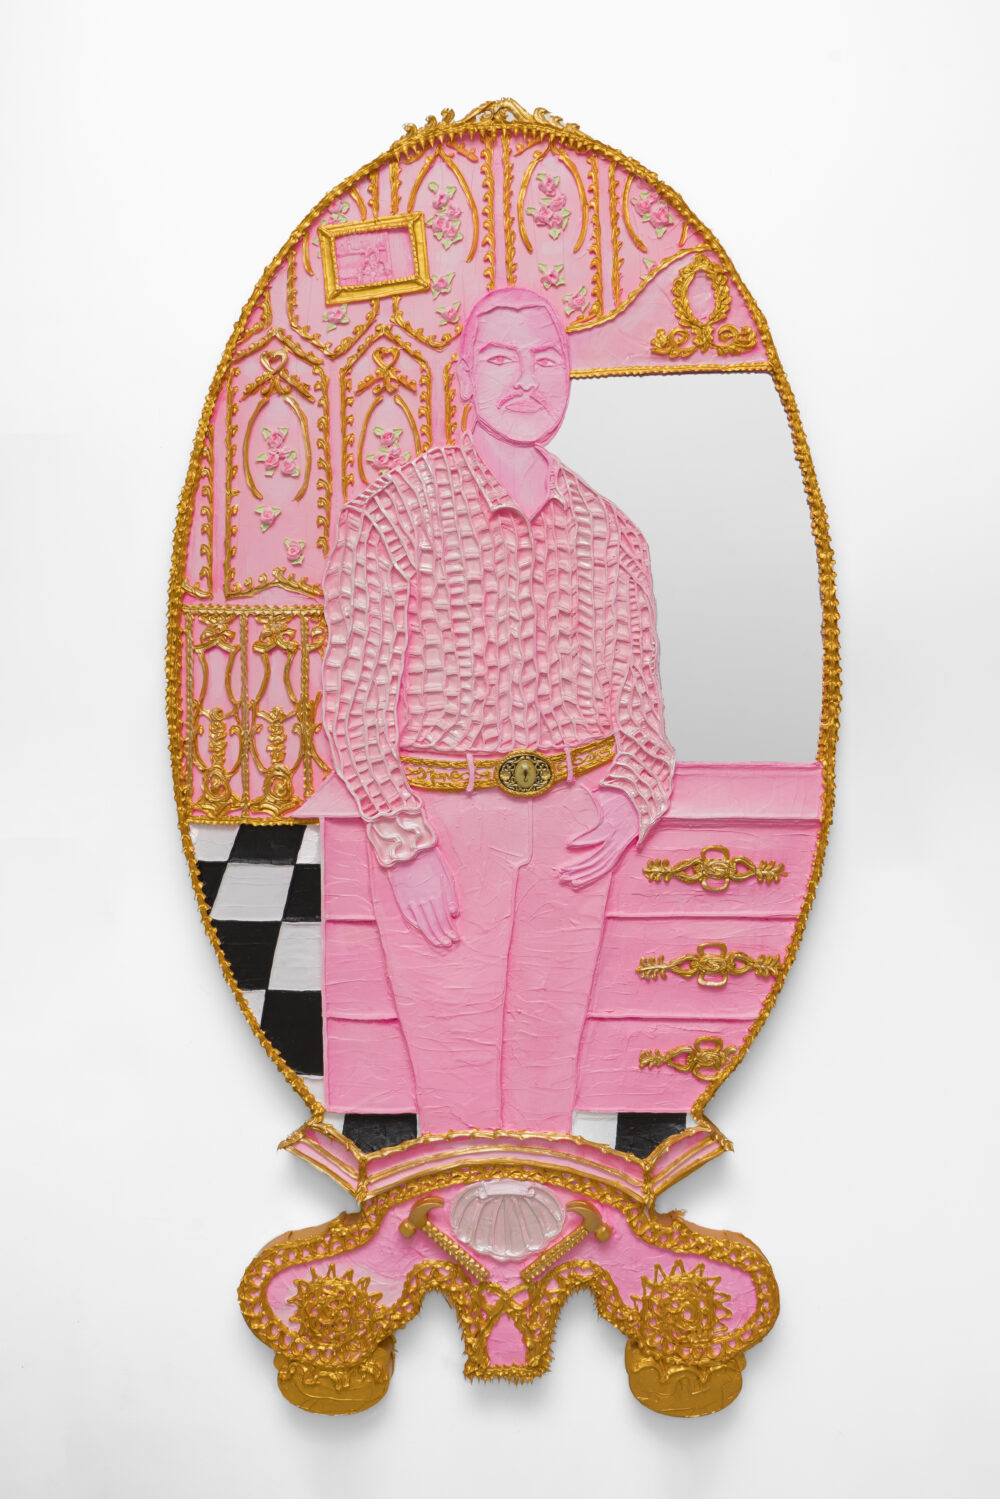 An oval shaped canvas with a monochromatic pink portrait of a man standing with a mirror in the background.